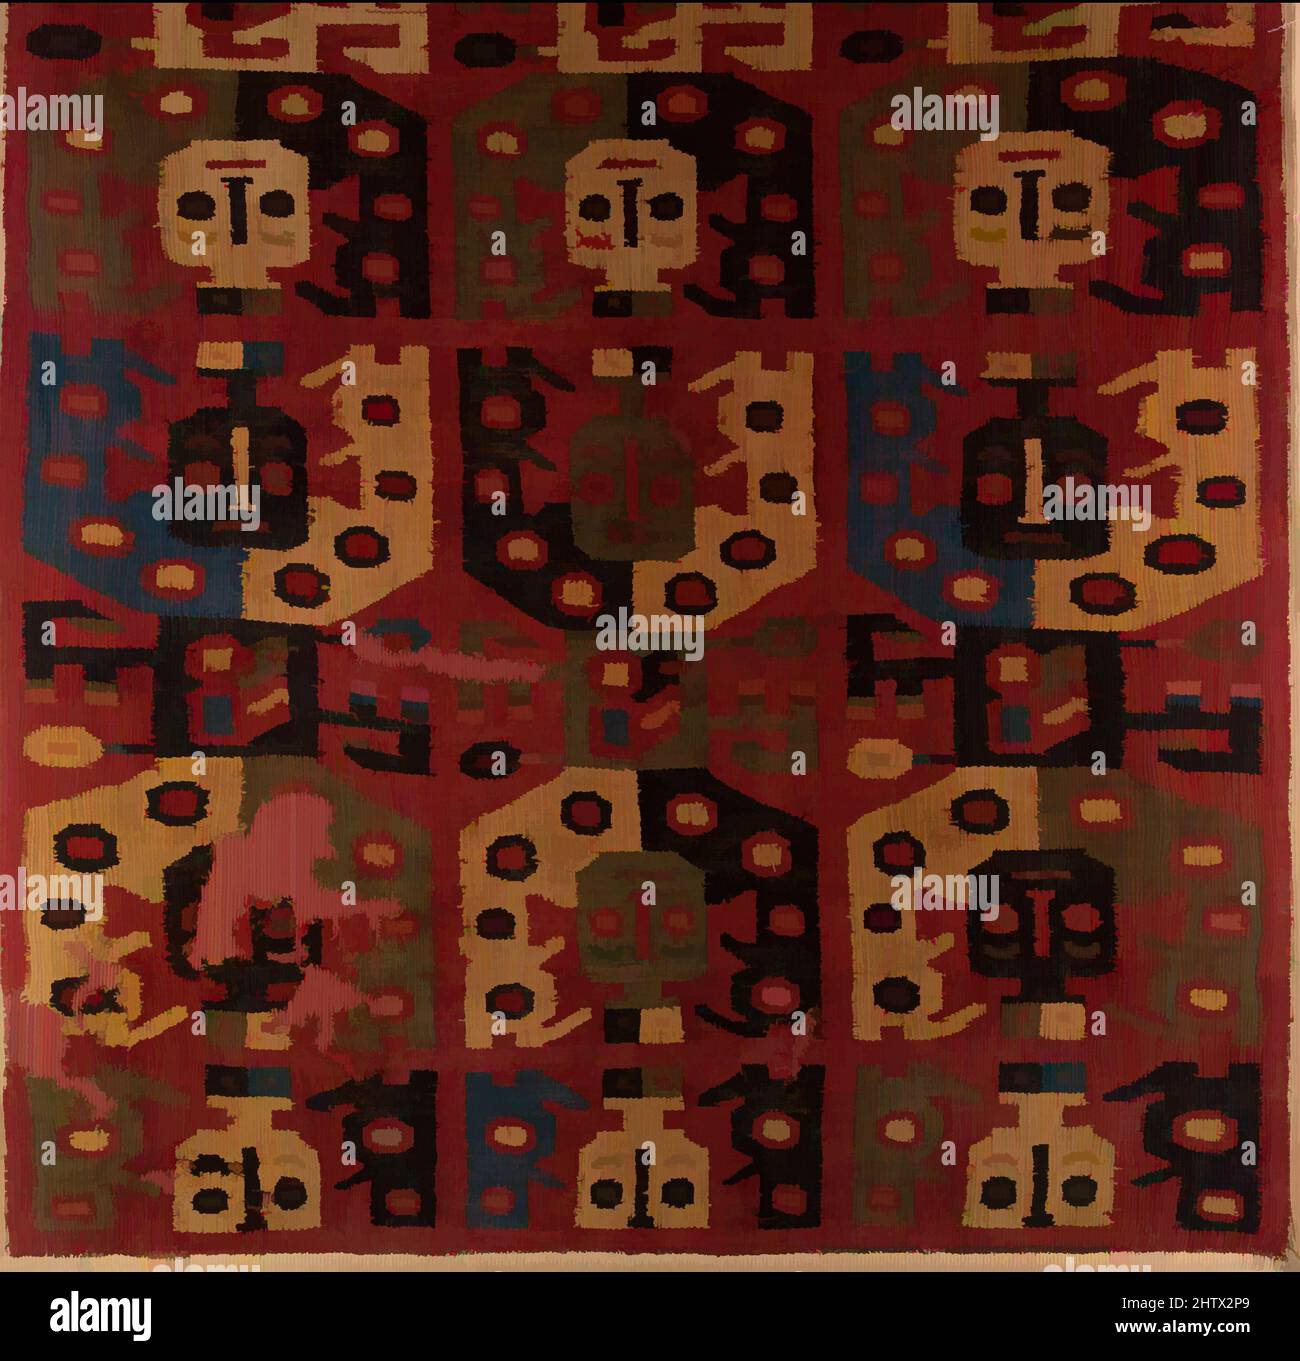 Art inspired by Panel, 10th–12th century, Peru, Wari, Cotton, camelid hair, Overall: 23 1/4 x 28 7/8 in. (59.06 x 73.34 cm), Textiles-Woven, Classic works modernized by Artotop with a splash of modernity. Shapes, color and value, eye-catching visual impact on art. Emotions through freedom of artworks in a contemporary way. A timeless message pursuing a wildly creative new direction. Artists turning to the digital medium and creating the Artotop NFT Stock Photo